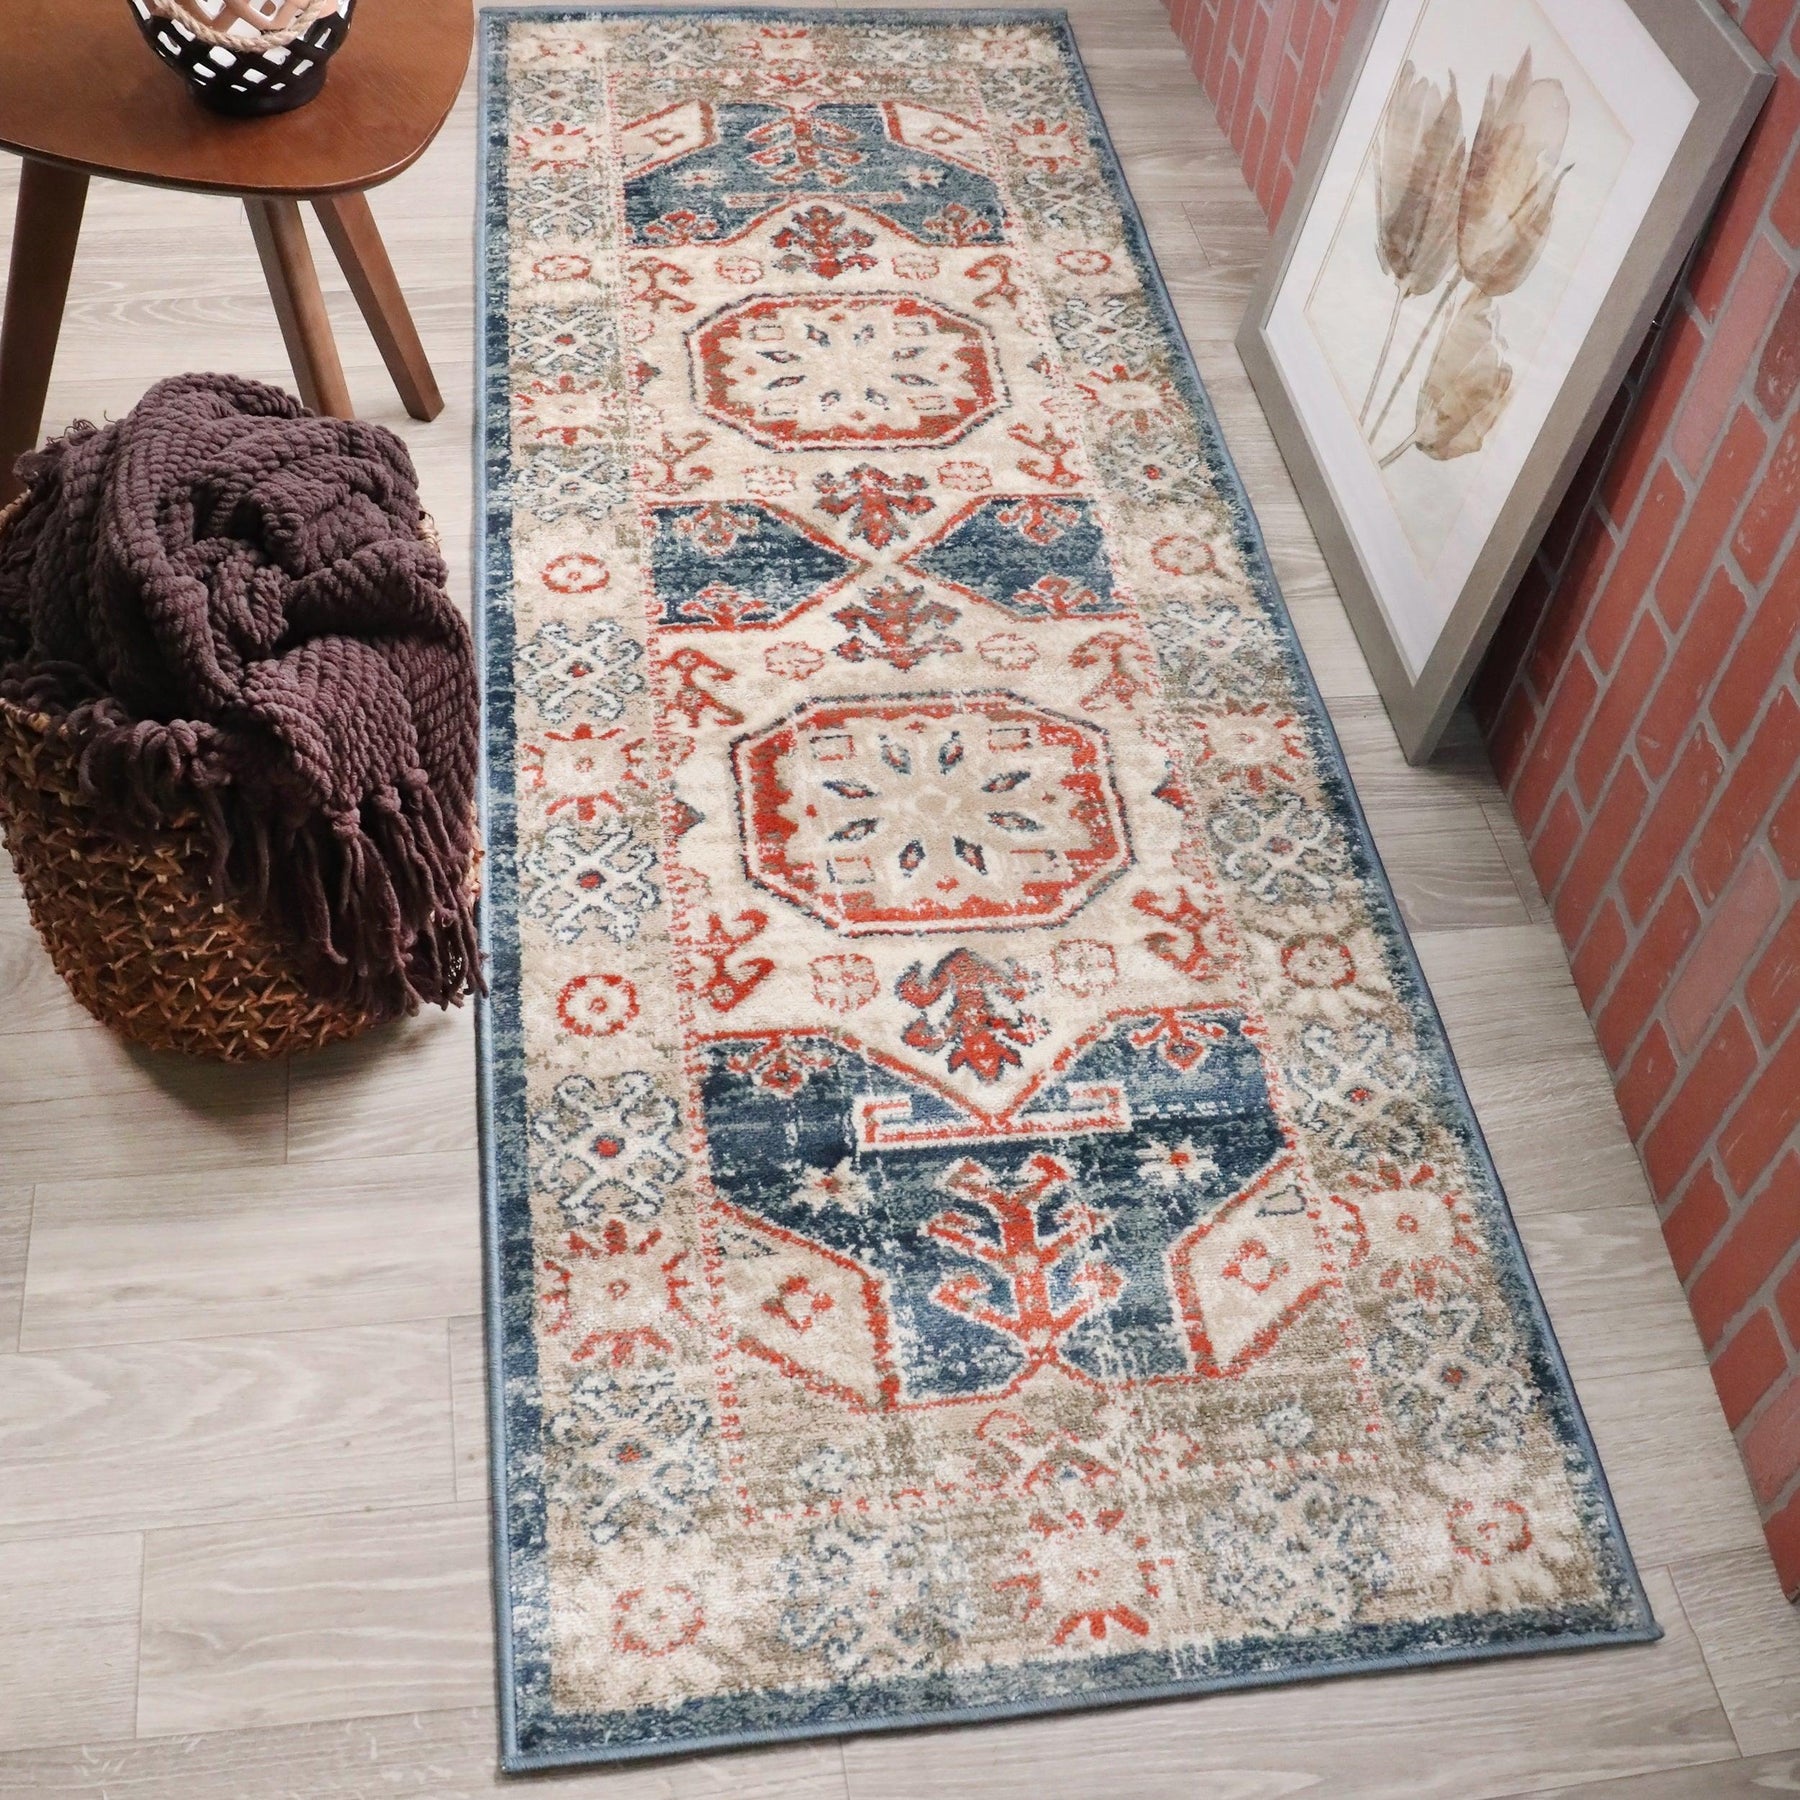 Rustic Distressed Geometric Design Indoor Home Area Rug Collection - Blue